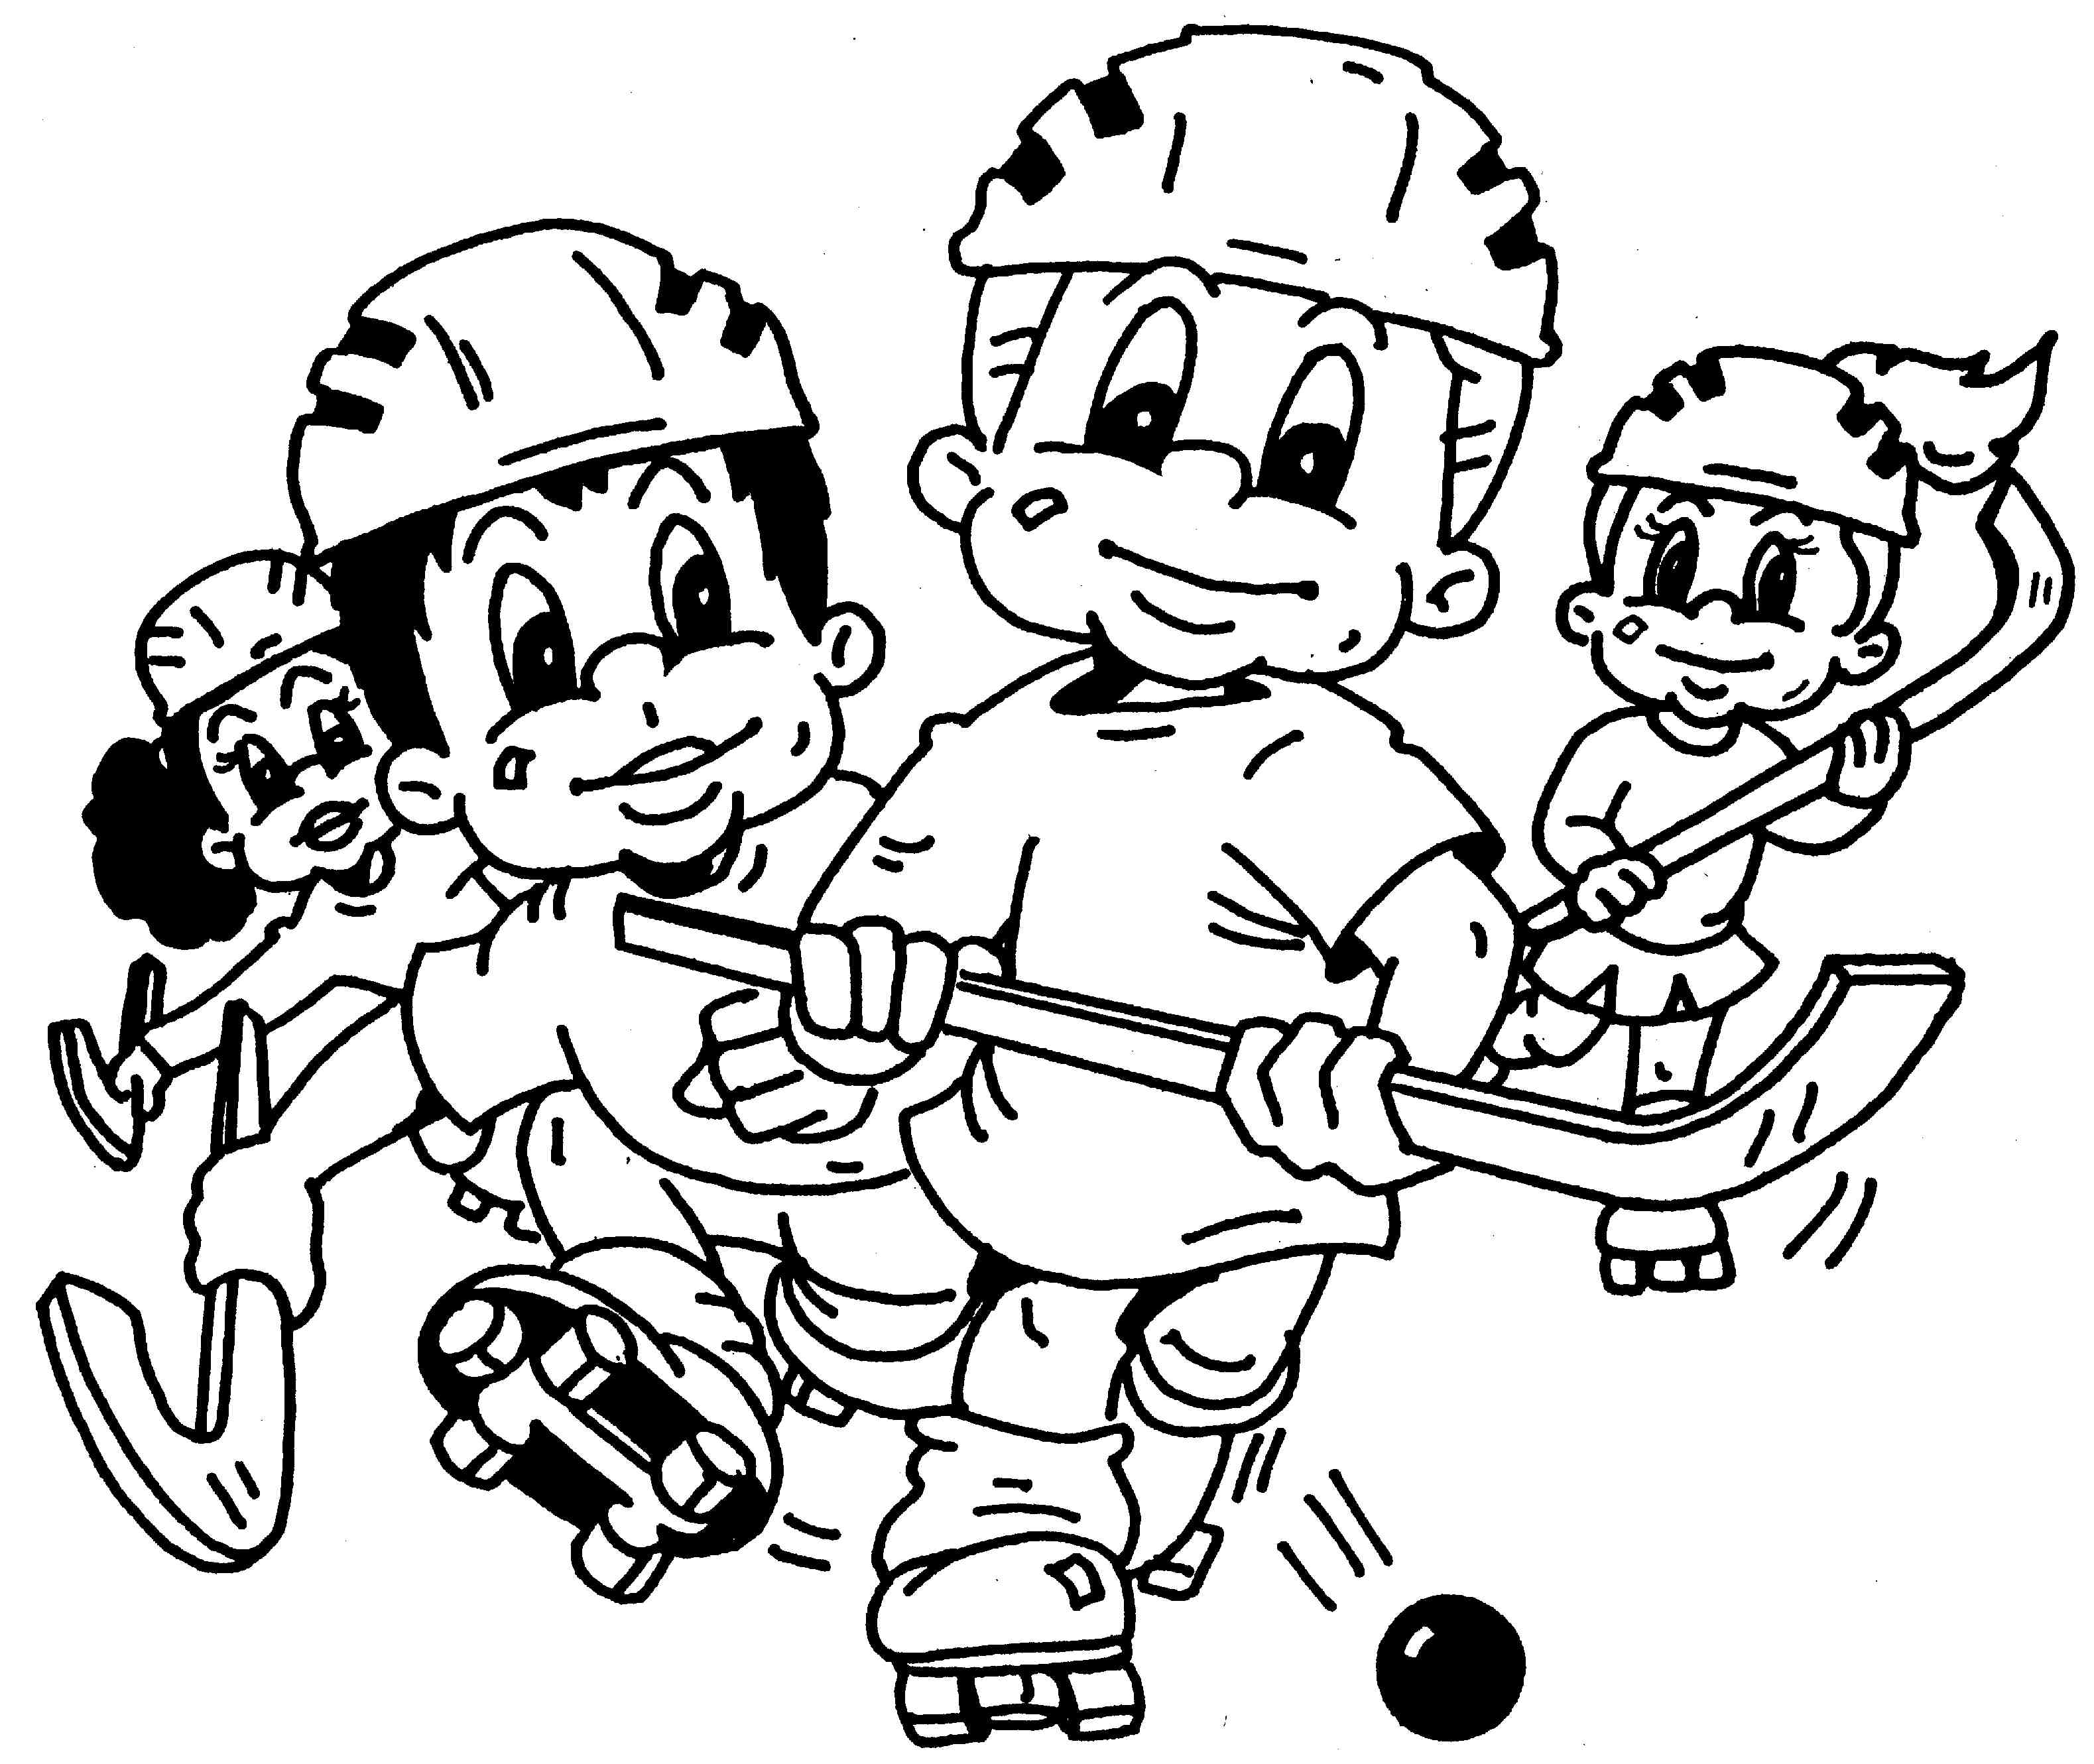 Hockey Coloring Pages Image